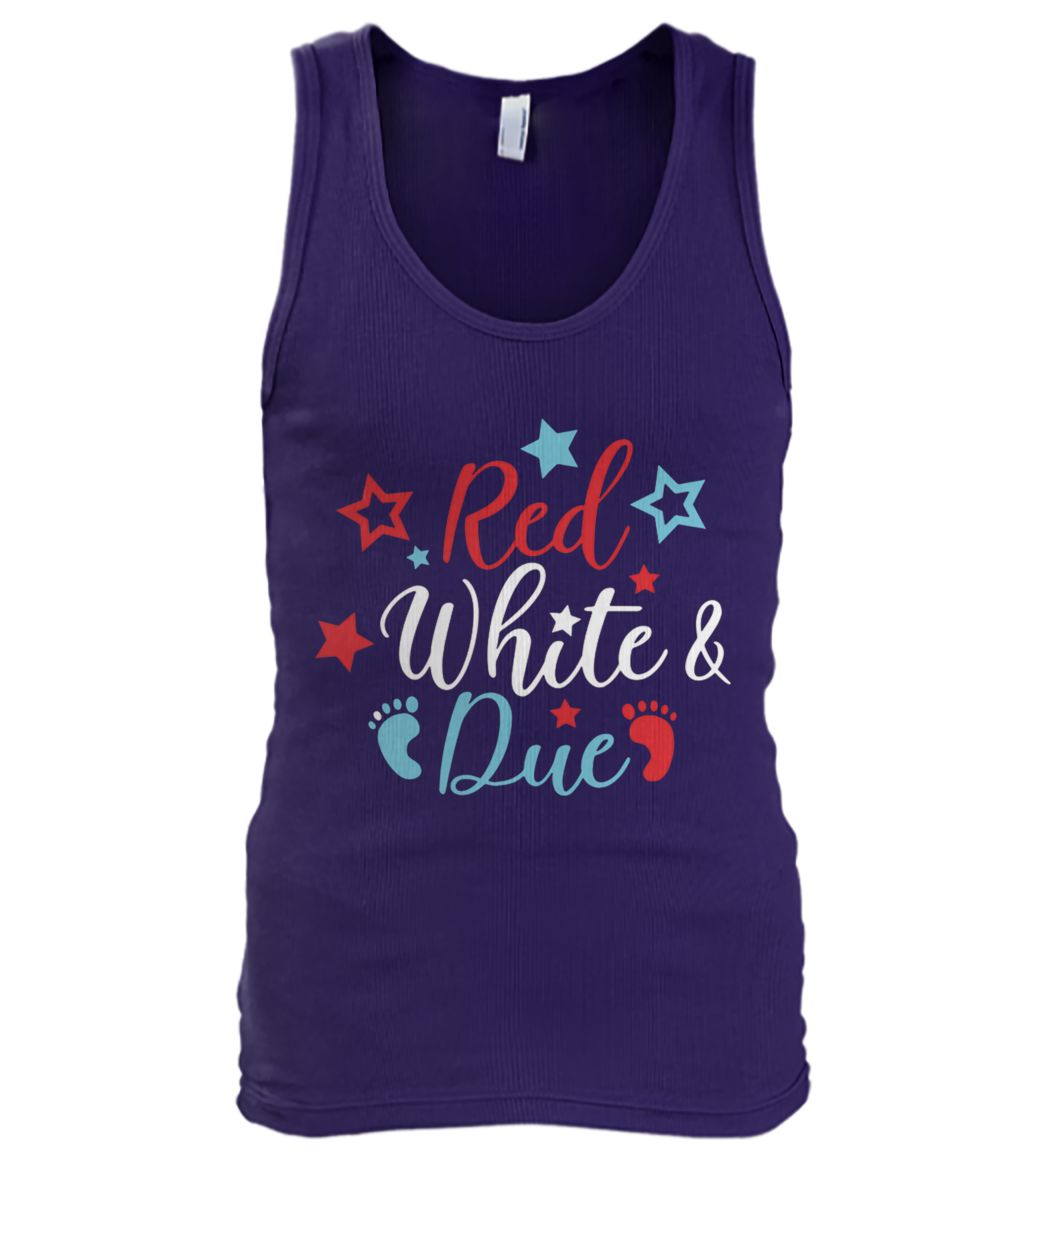 Red white and due pregnancy announcement men's tank top